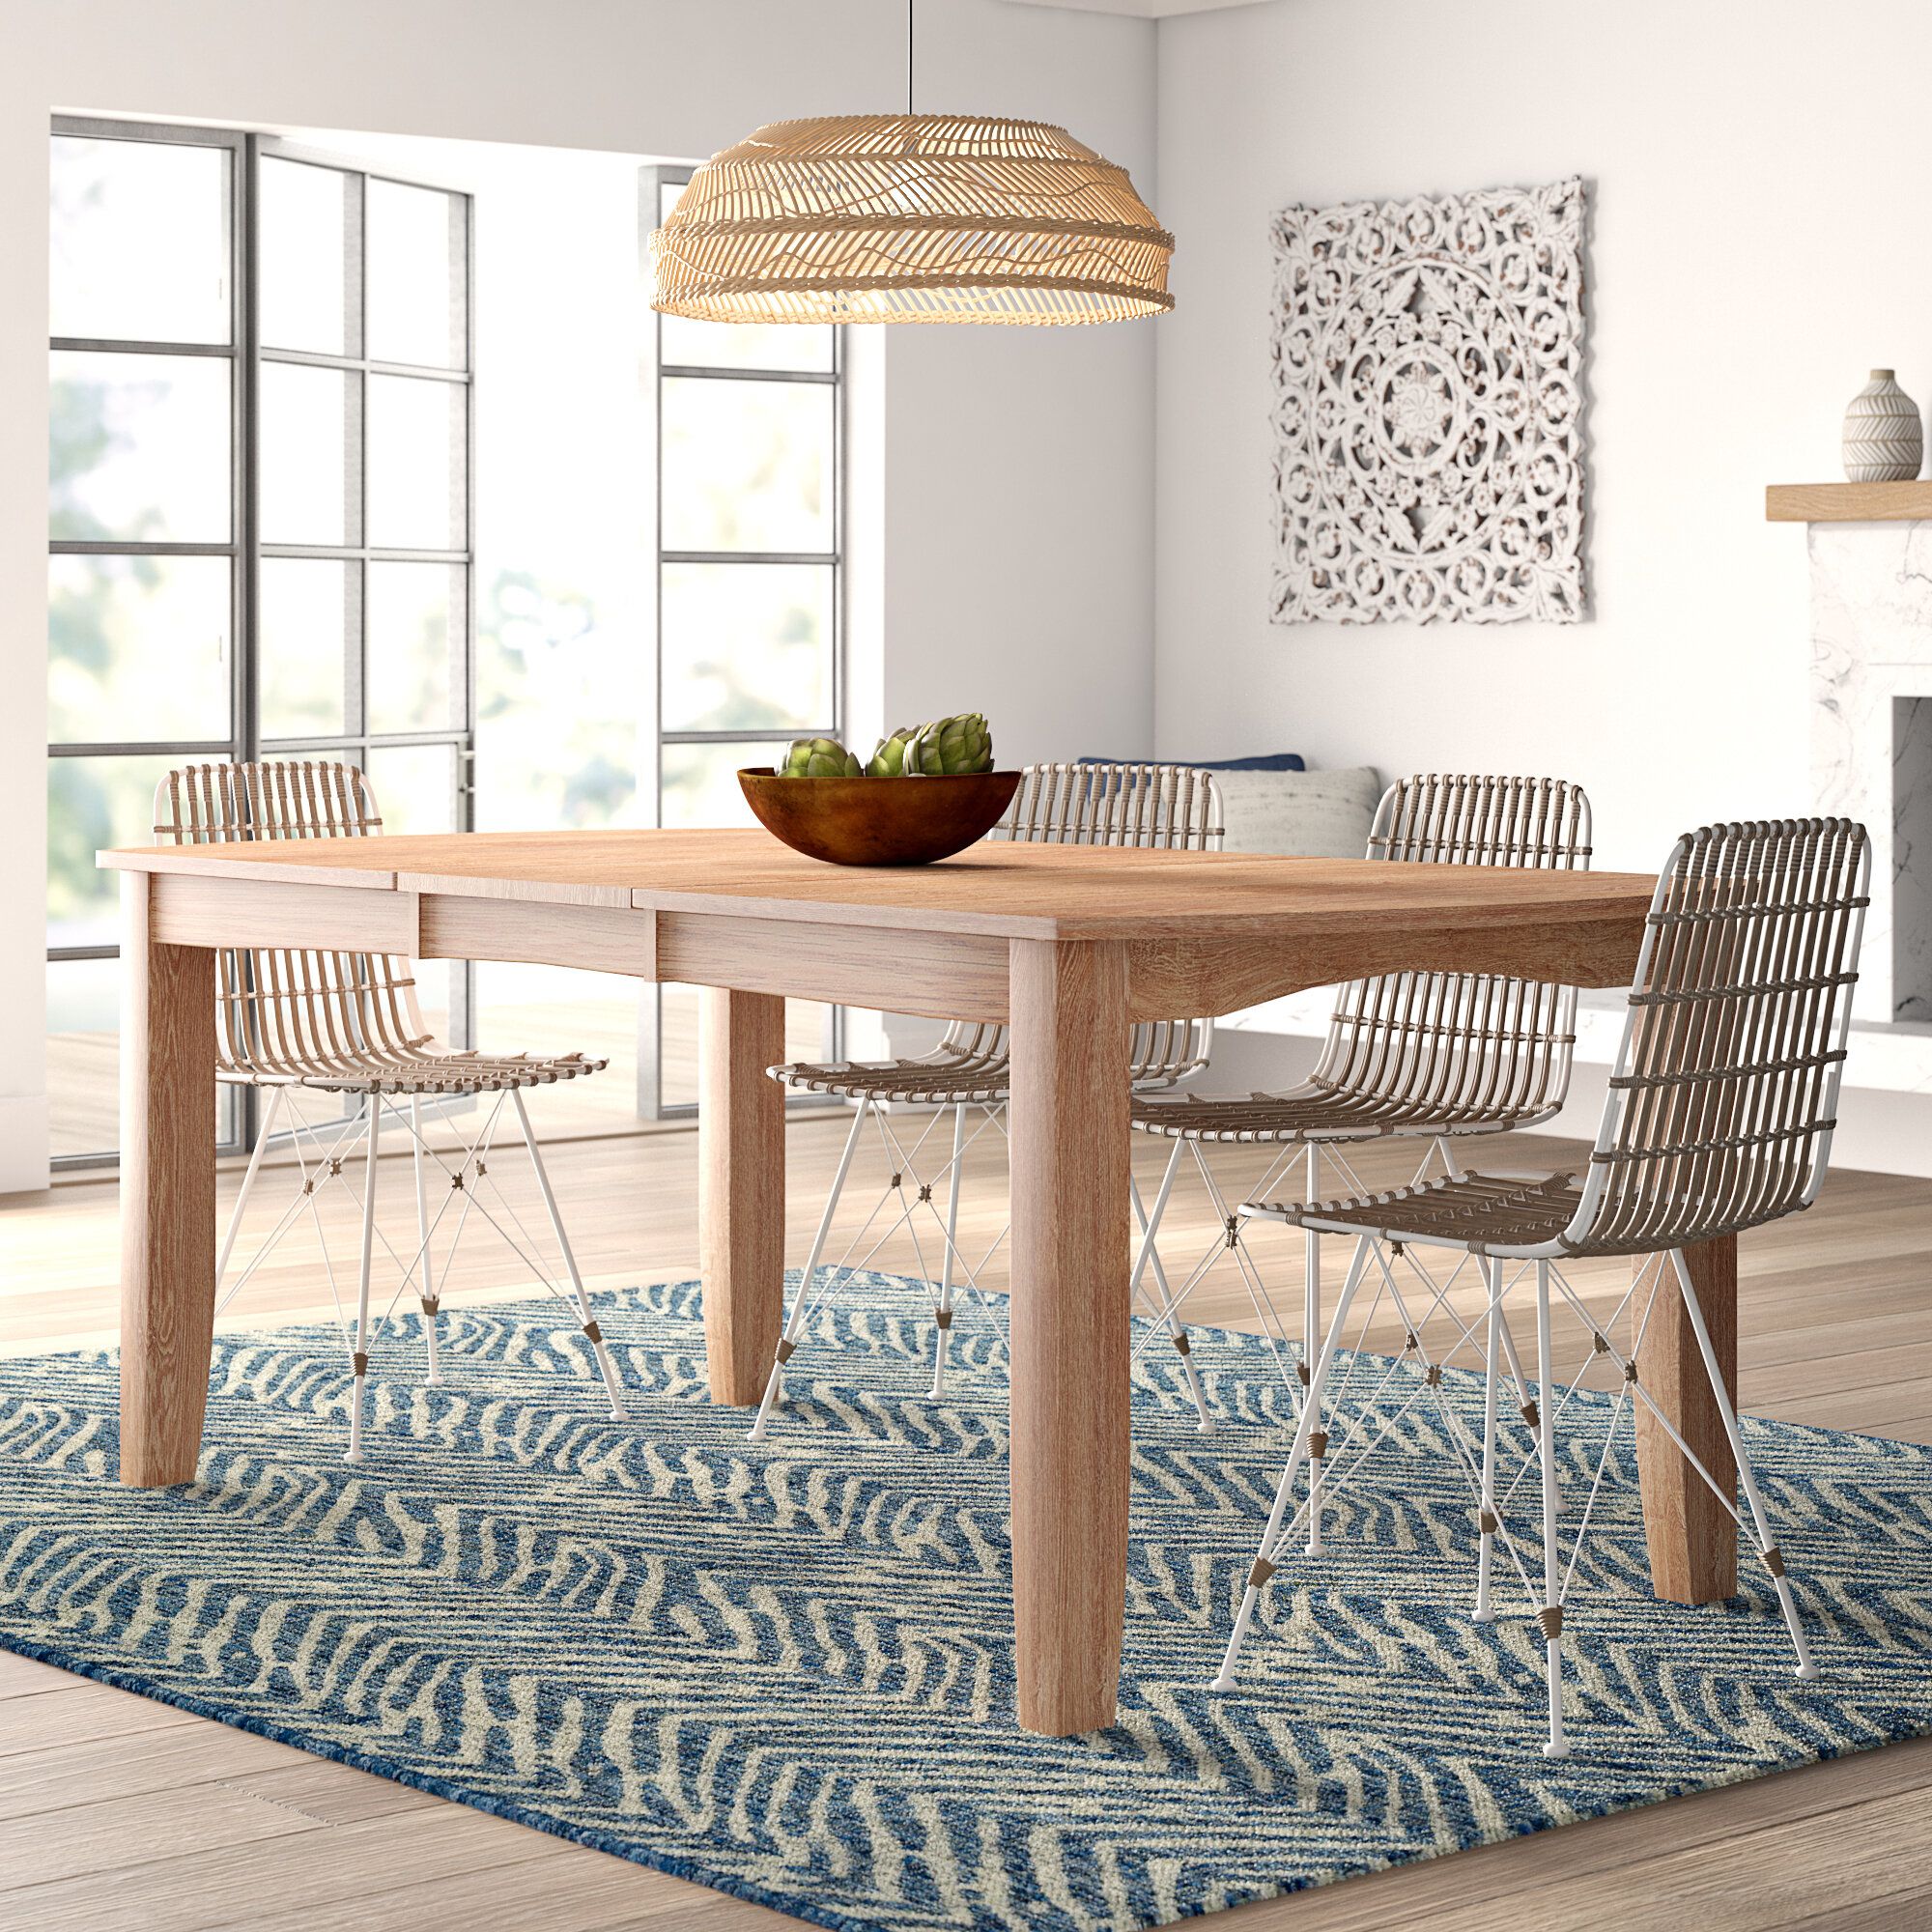 Wooden Extendable Dining Tables – Table Design Ideas Regarding Most Recent Parkmore Reclaimed Wood Extending Dining Tables (View 9 of 25)